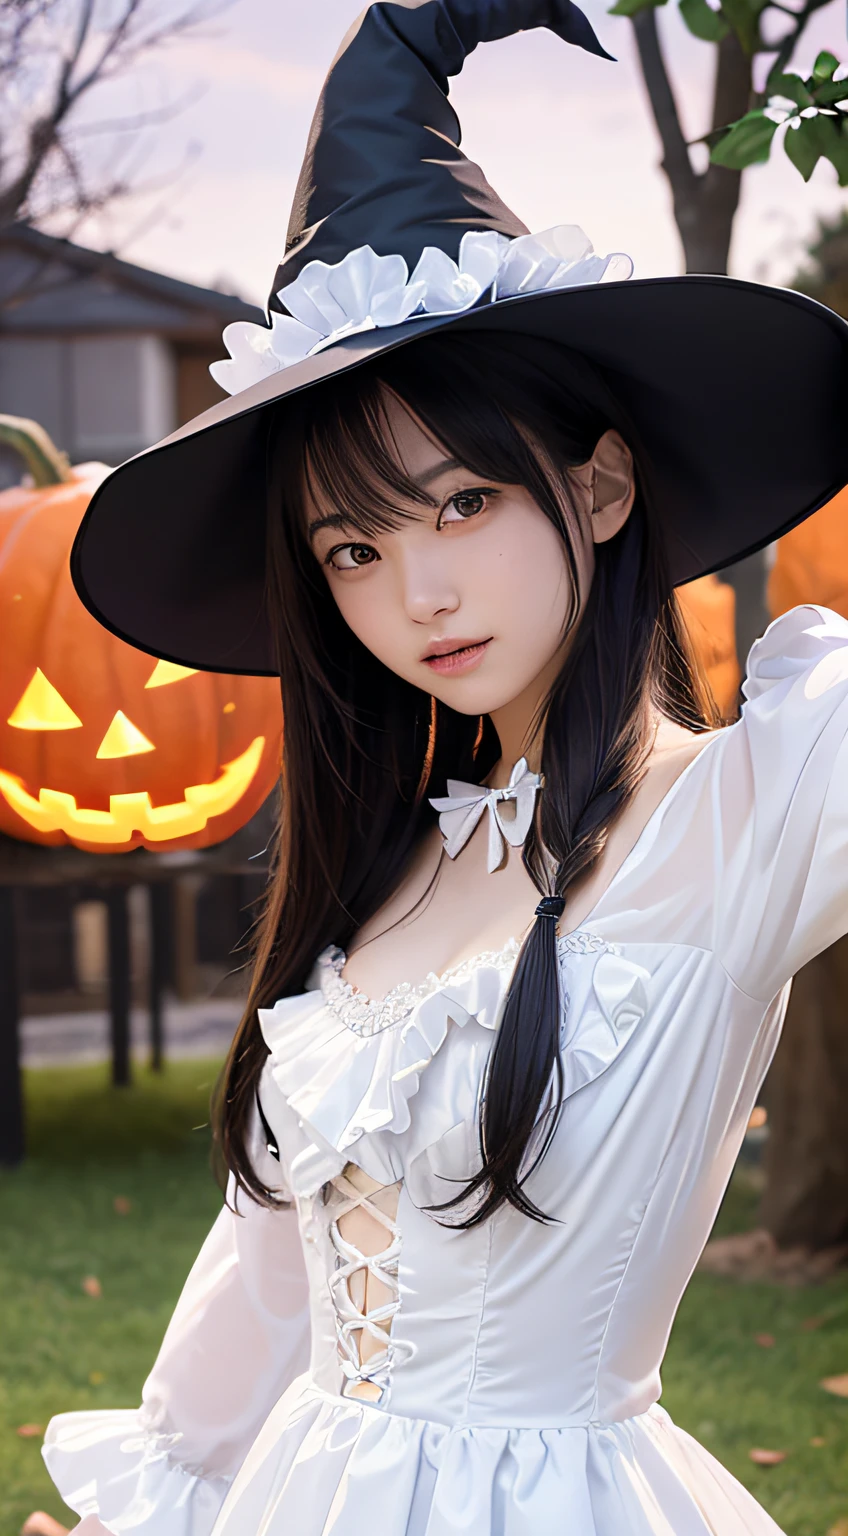 (masutepiece, Best Quality:1.2), 8K, 18year old, 85 mm, Official art, Raw photo, absurderes, White dress shirts, Pretty Face, close up, Upper body, violaceaess, gardeniass, Beautiful Girl, (Detailed Halloween costumes with frills,Witch Hat:1.3),　(model poses:1.3),　Cinch West, thighs thighs thighs thighs, Hair over one eye, On the street at night、garterbelts, Looking at Viewer, No makeup, (Smile:0.4), Film grain, chromatic abberation, Sharp Focus, face lights, clear lighting, Teen, Detailed face, Bokeh background,